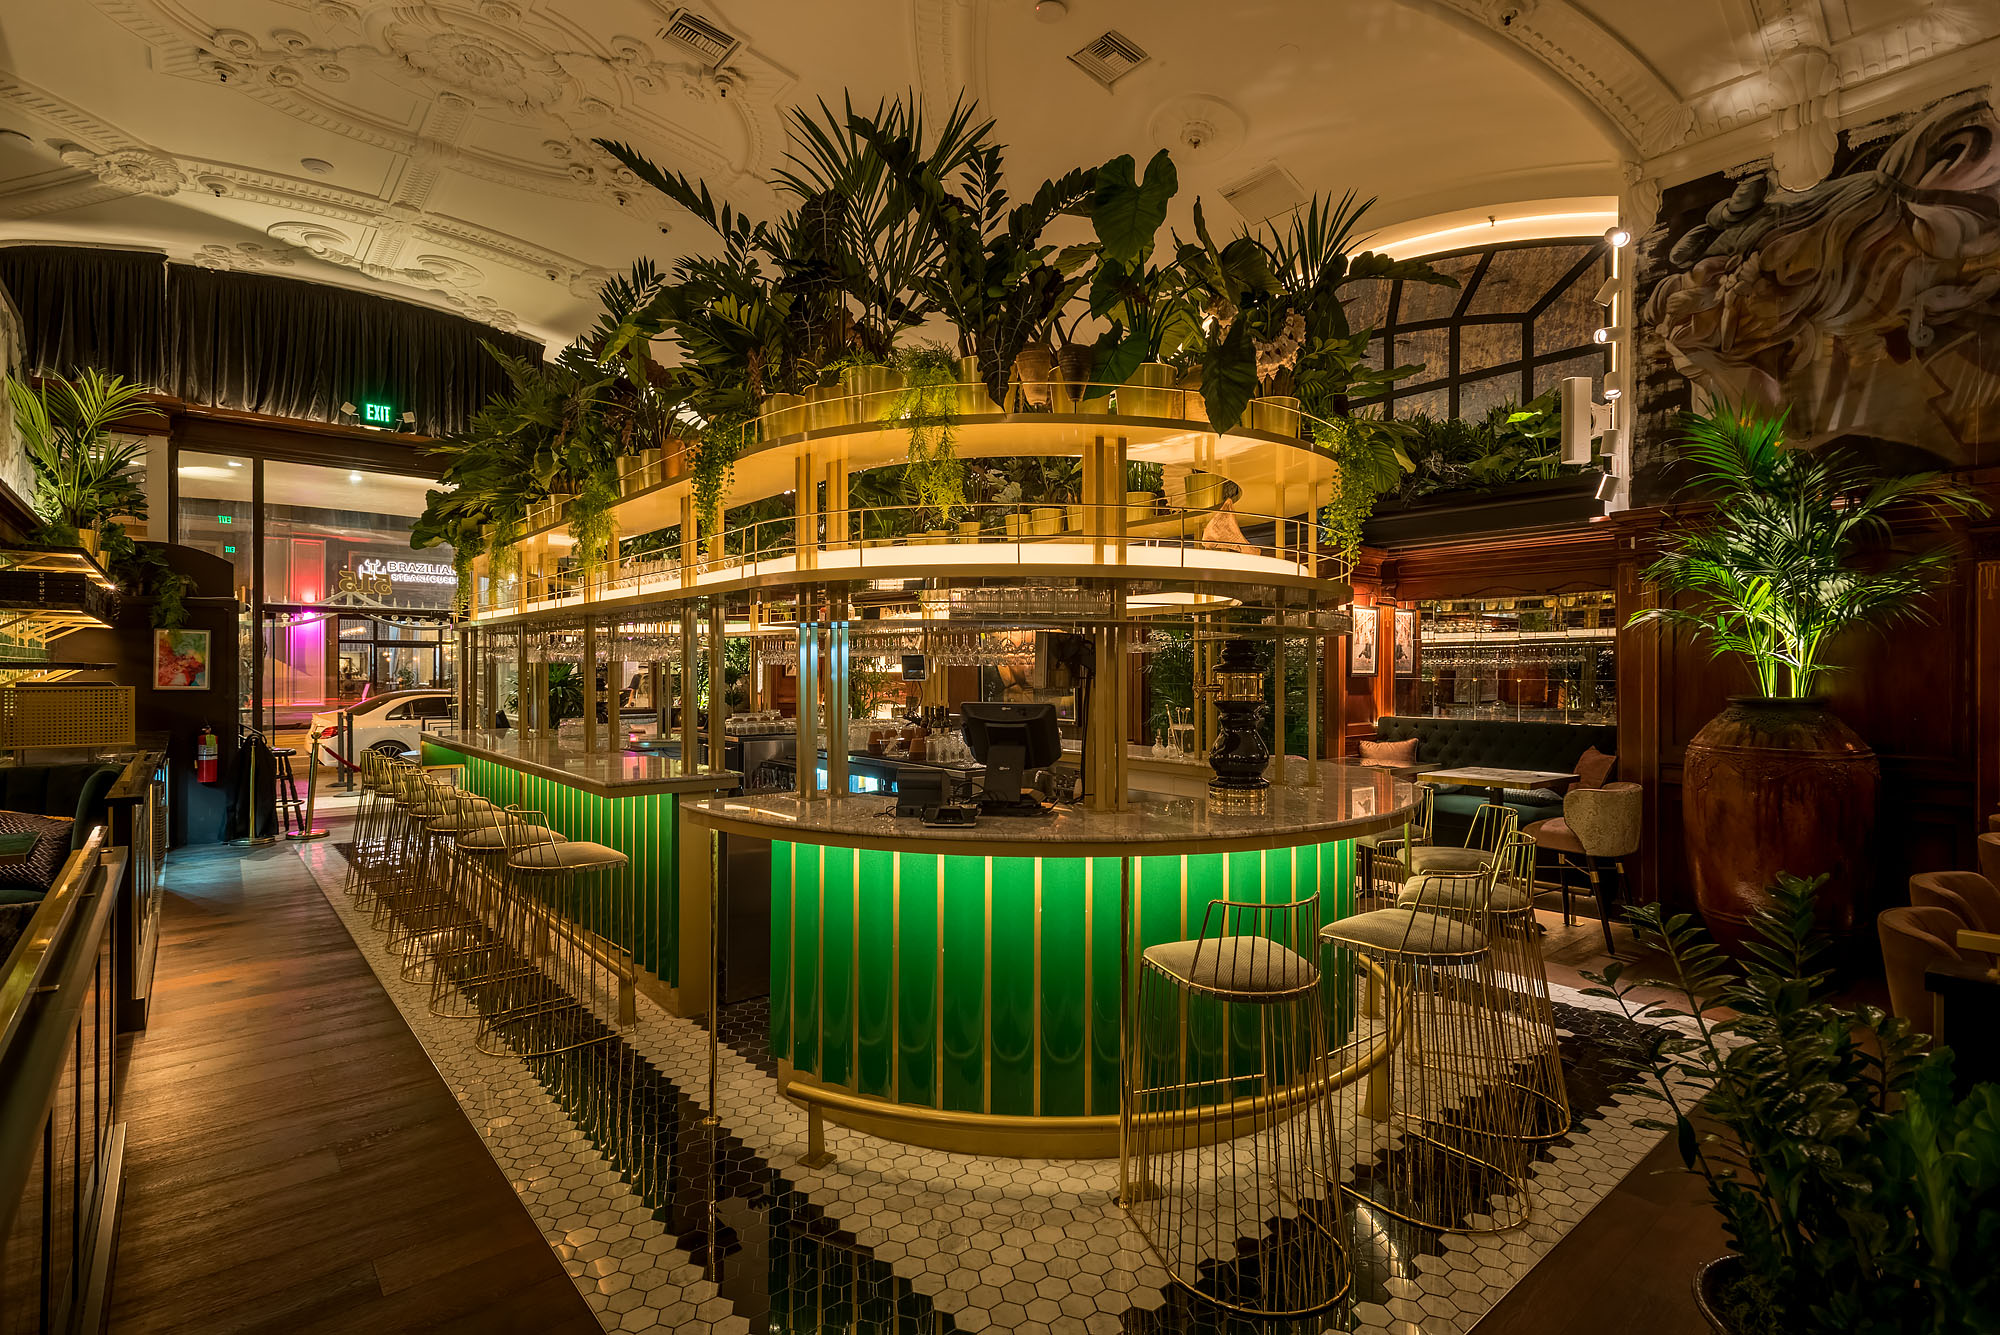 A bright green wraparound bar layered with greenery on top and gold touches.